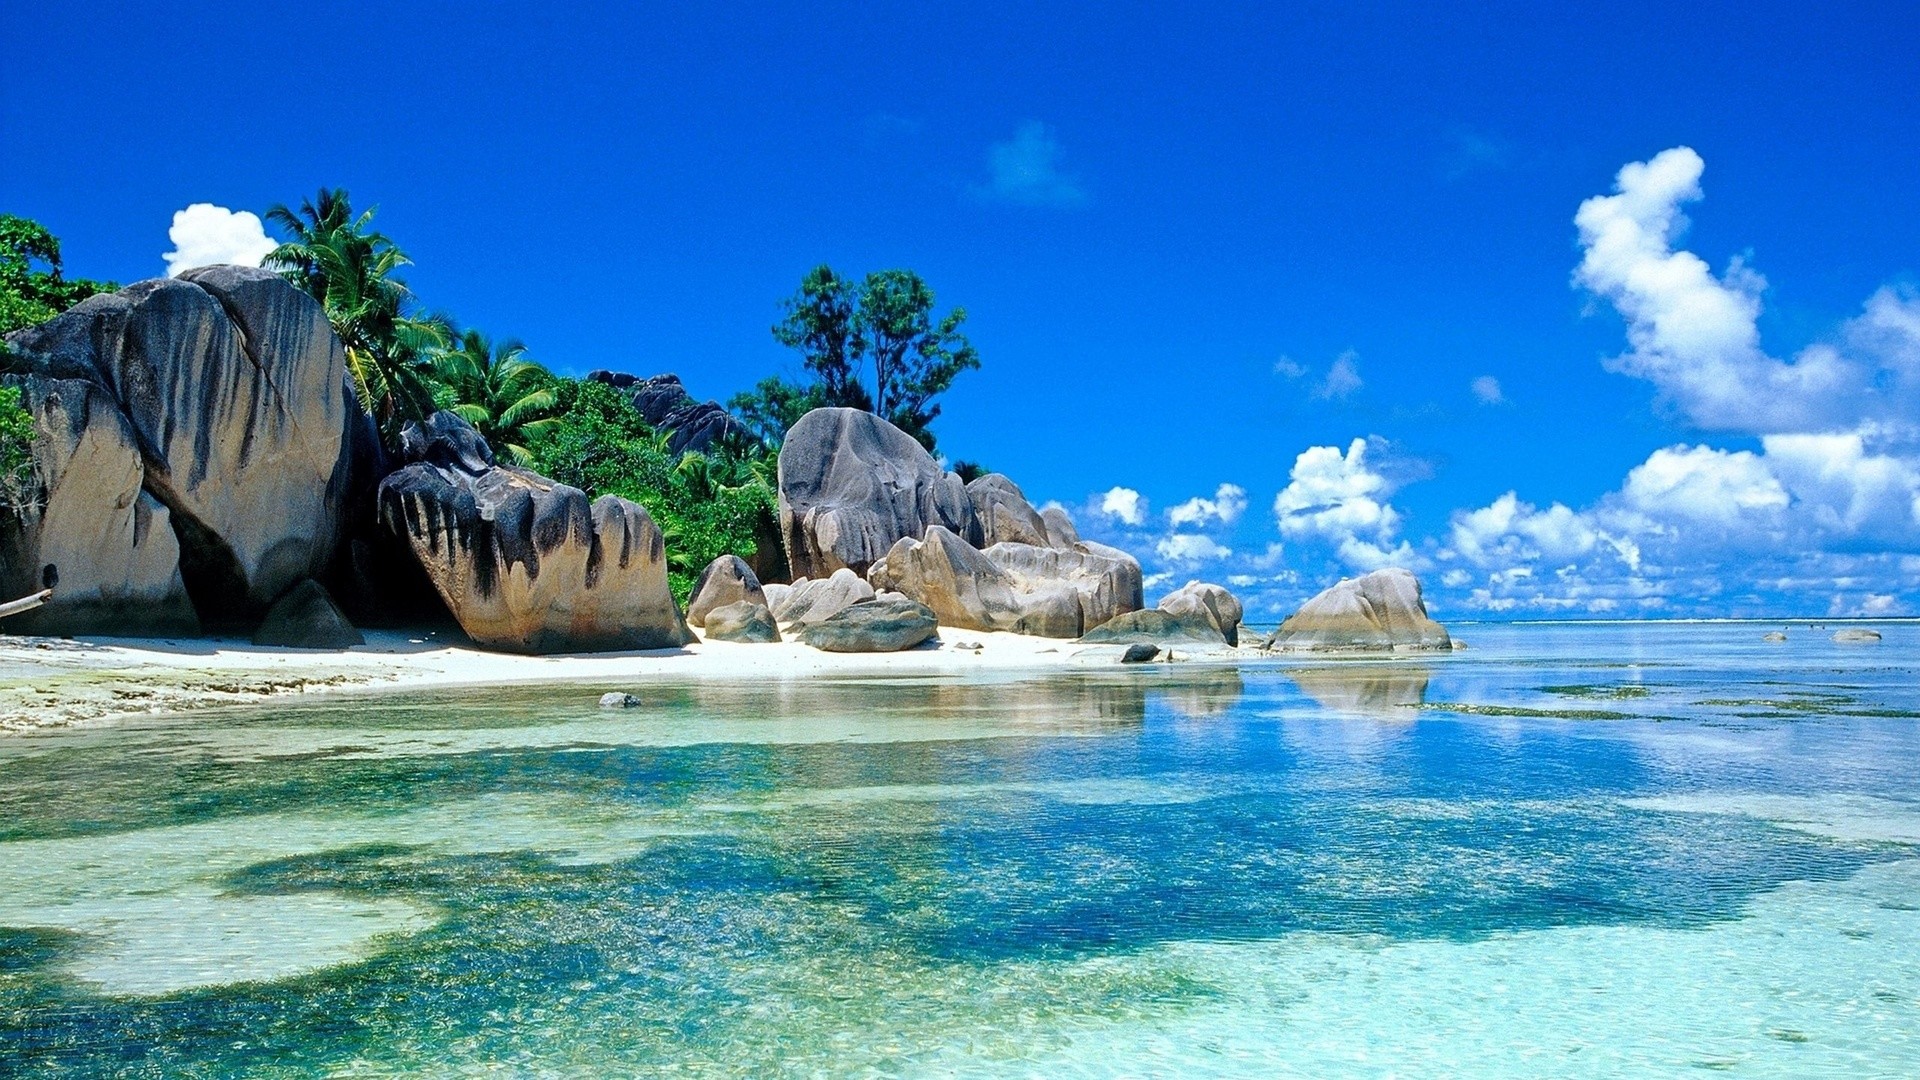 1920x1080 Free Beach Screensavers And Wallpapers Tropical Beach With Large Rocks .